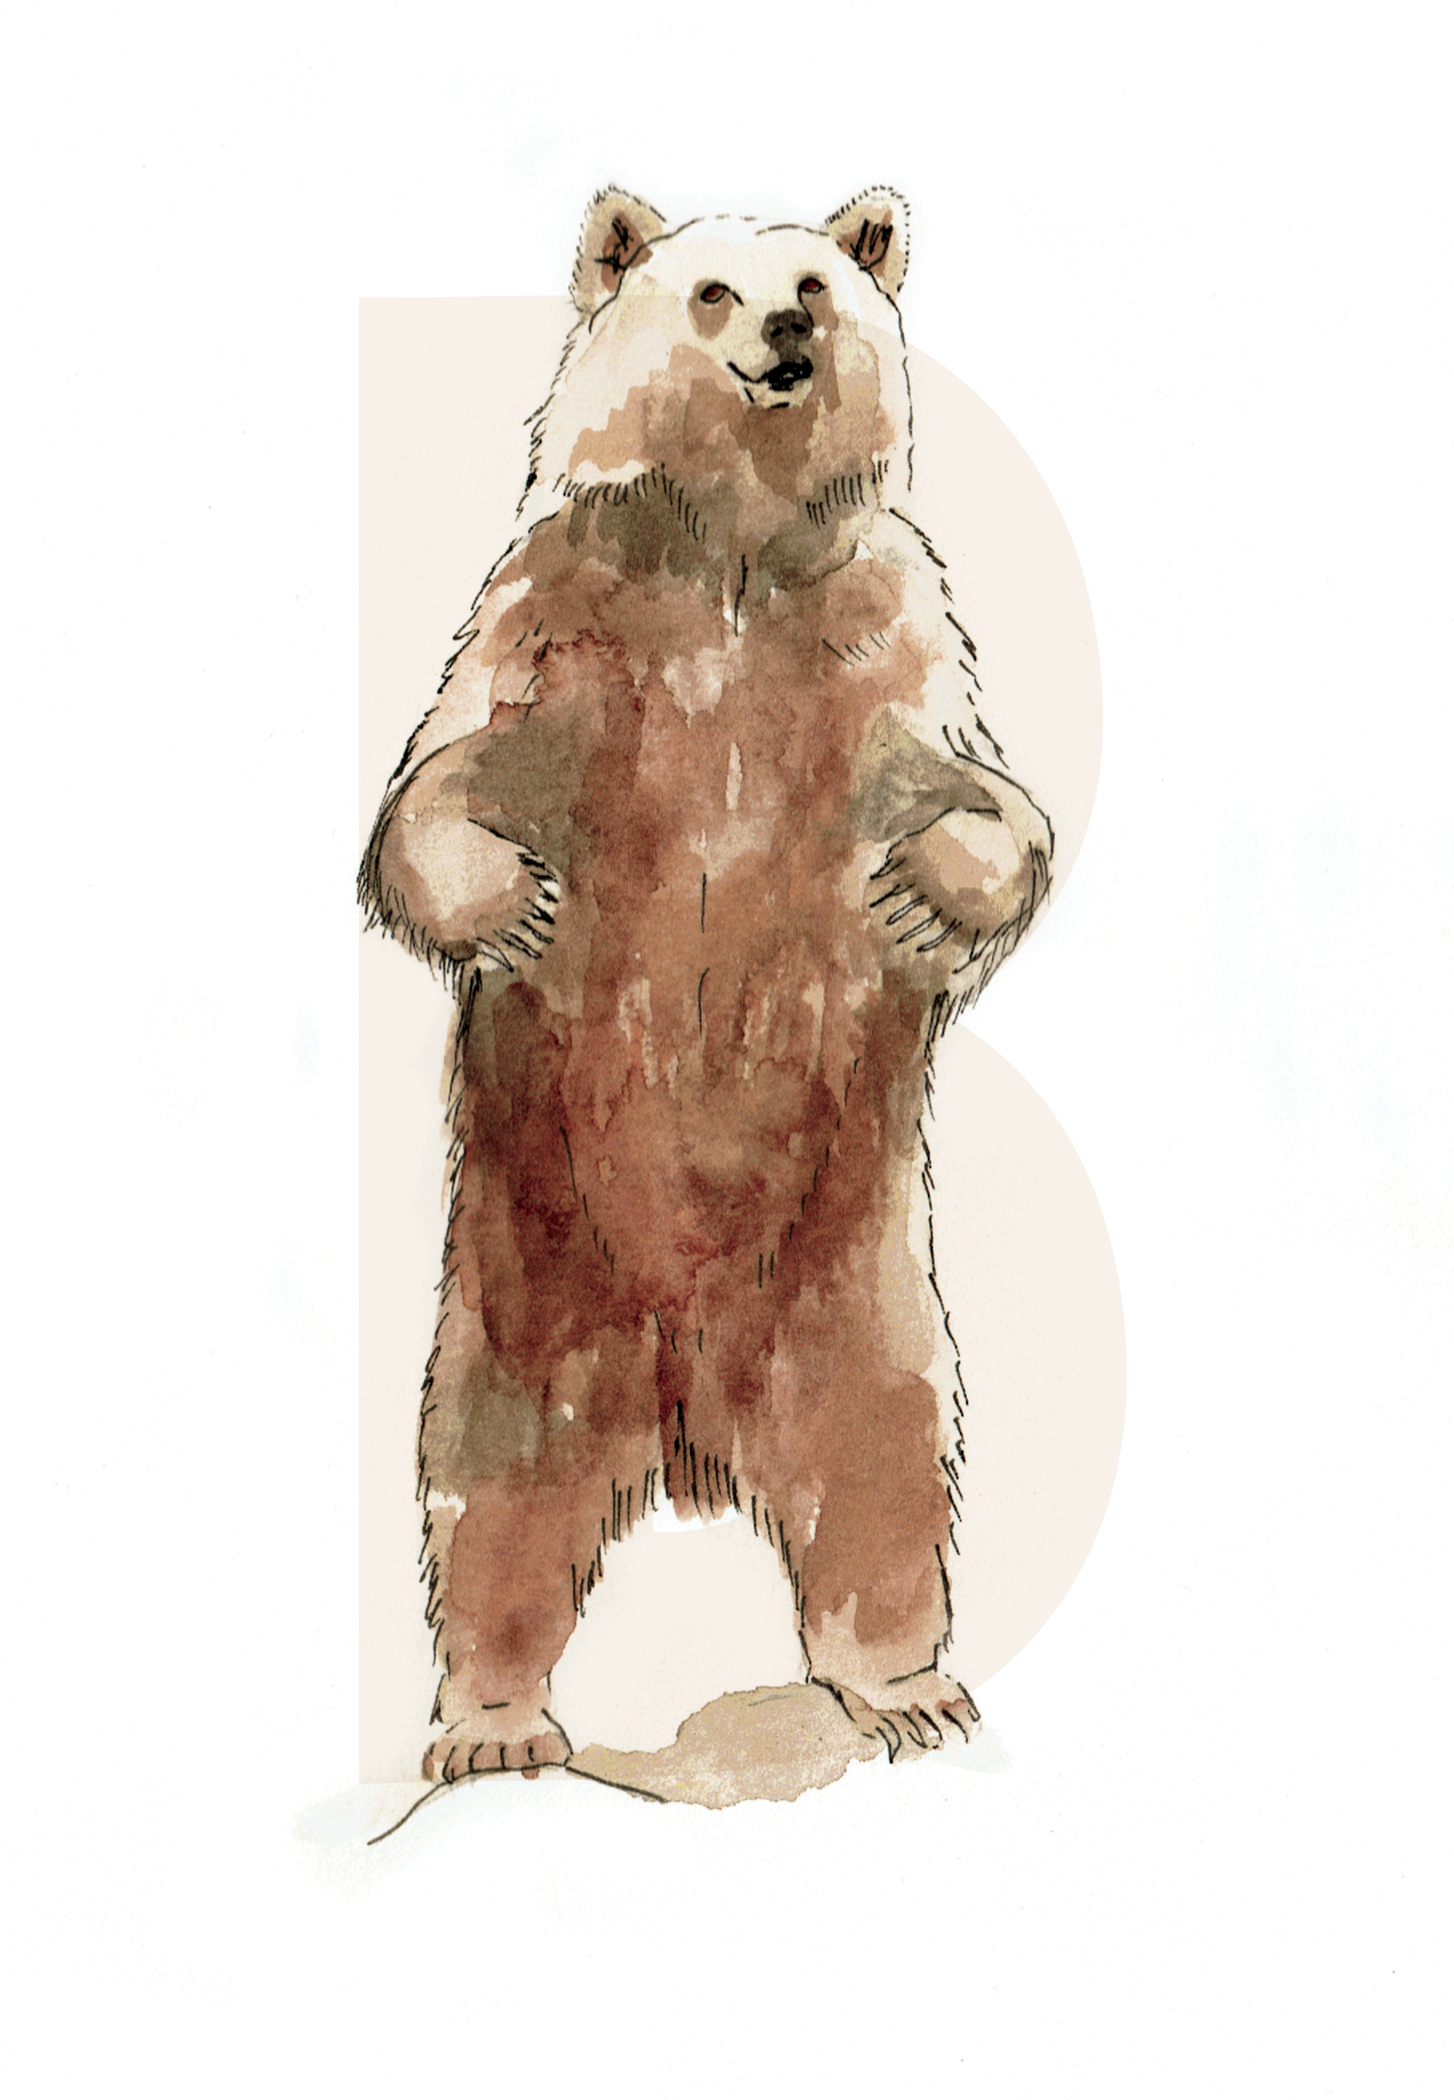 B is for Brown Bear